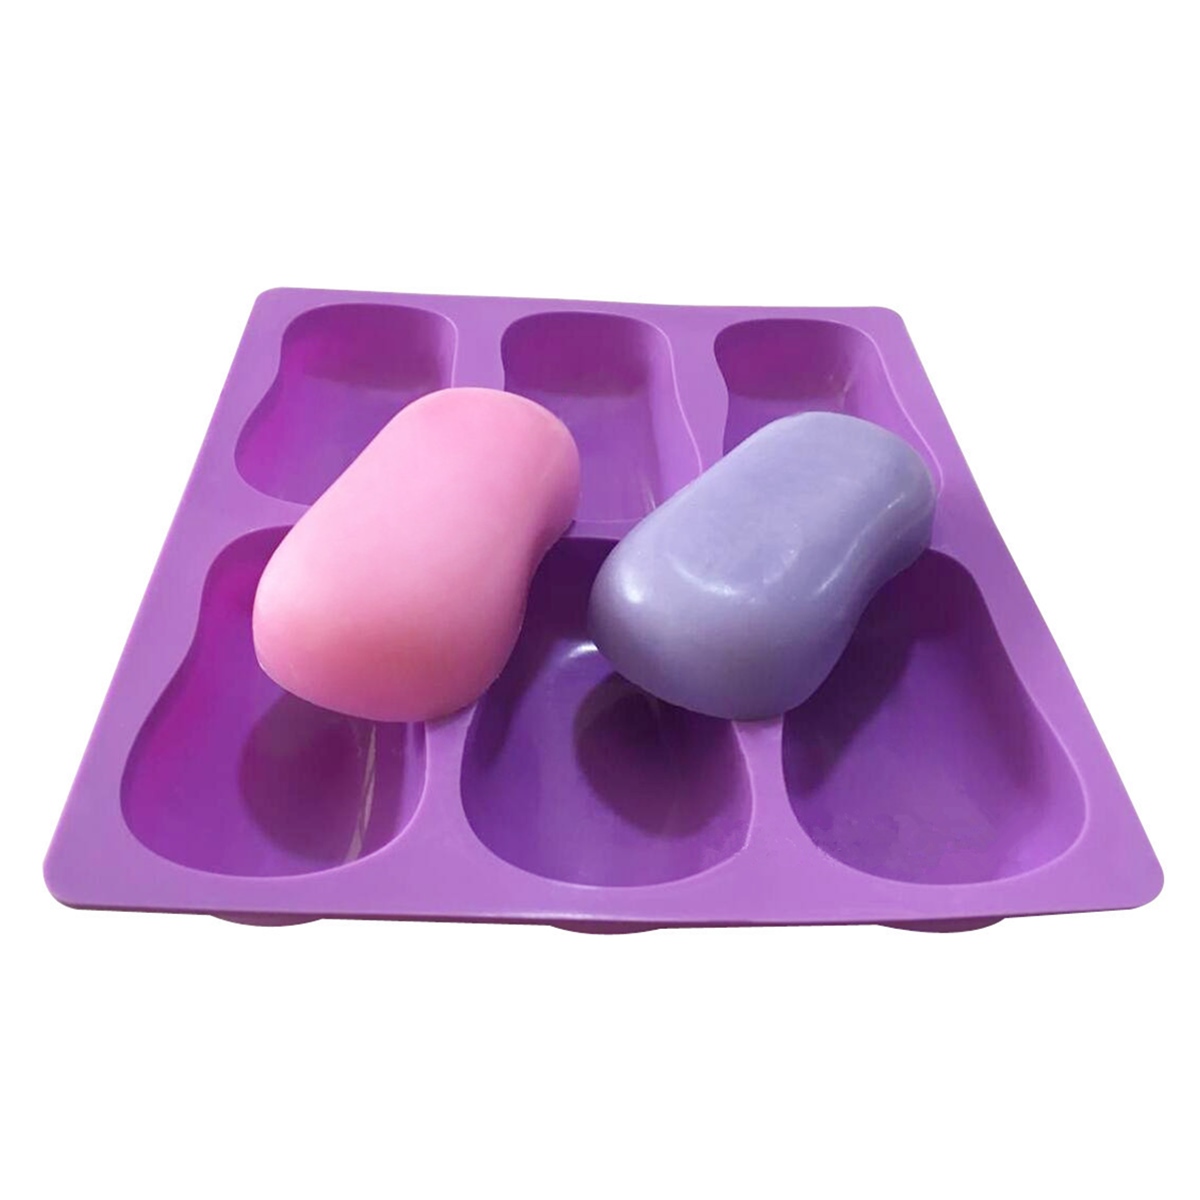 

DIY 6 Slots Cake Mold Tool 3D Oval Silicone Soap Mould Baking Mold Handmade Chocolate Pudding Jelly